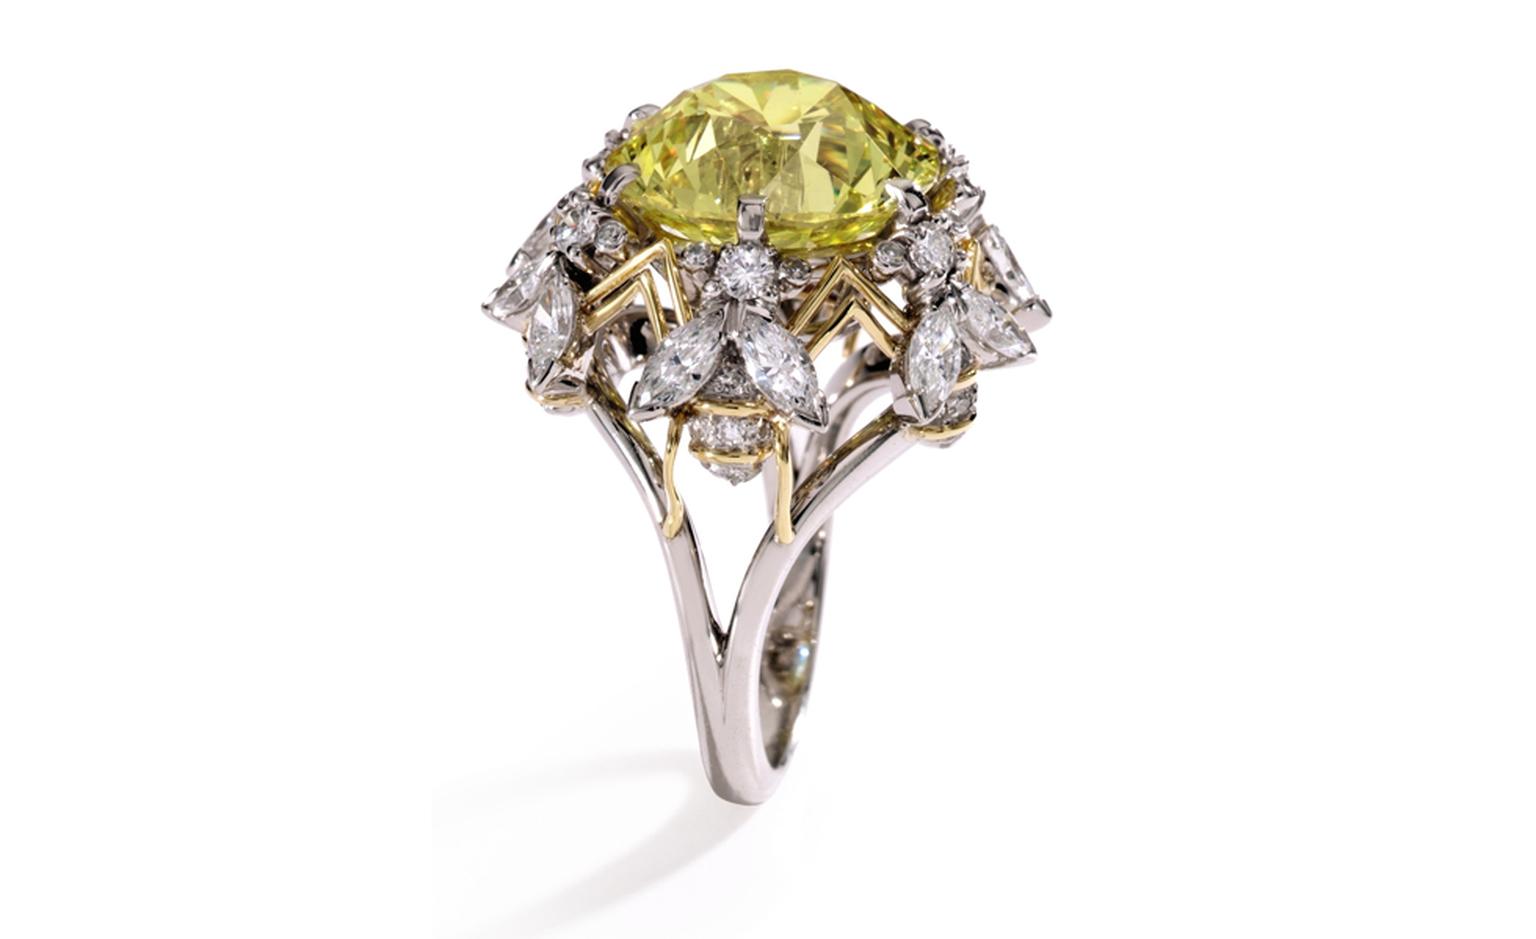 Lot 187 Platinum, 18 Karat Gold, Fancy Vivid Yellow Diamond and Near Colorless Diamond Ring, Schlumberger for Tiffany & Co., 1972 Est. $500/700,000. SOLD FOR $1,082,500